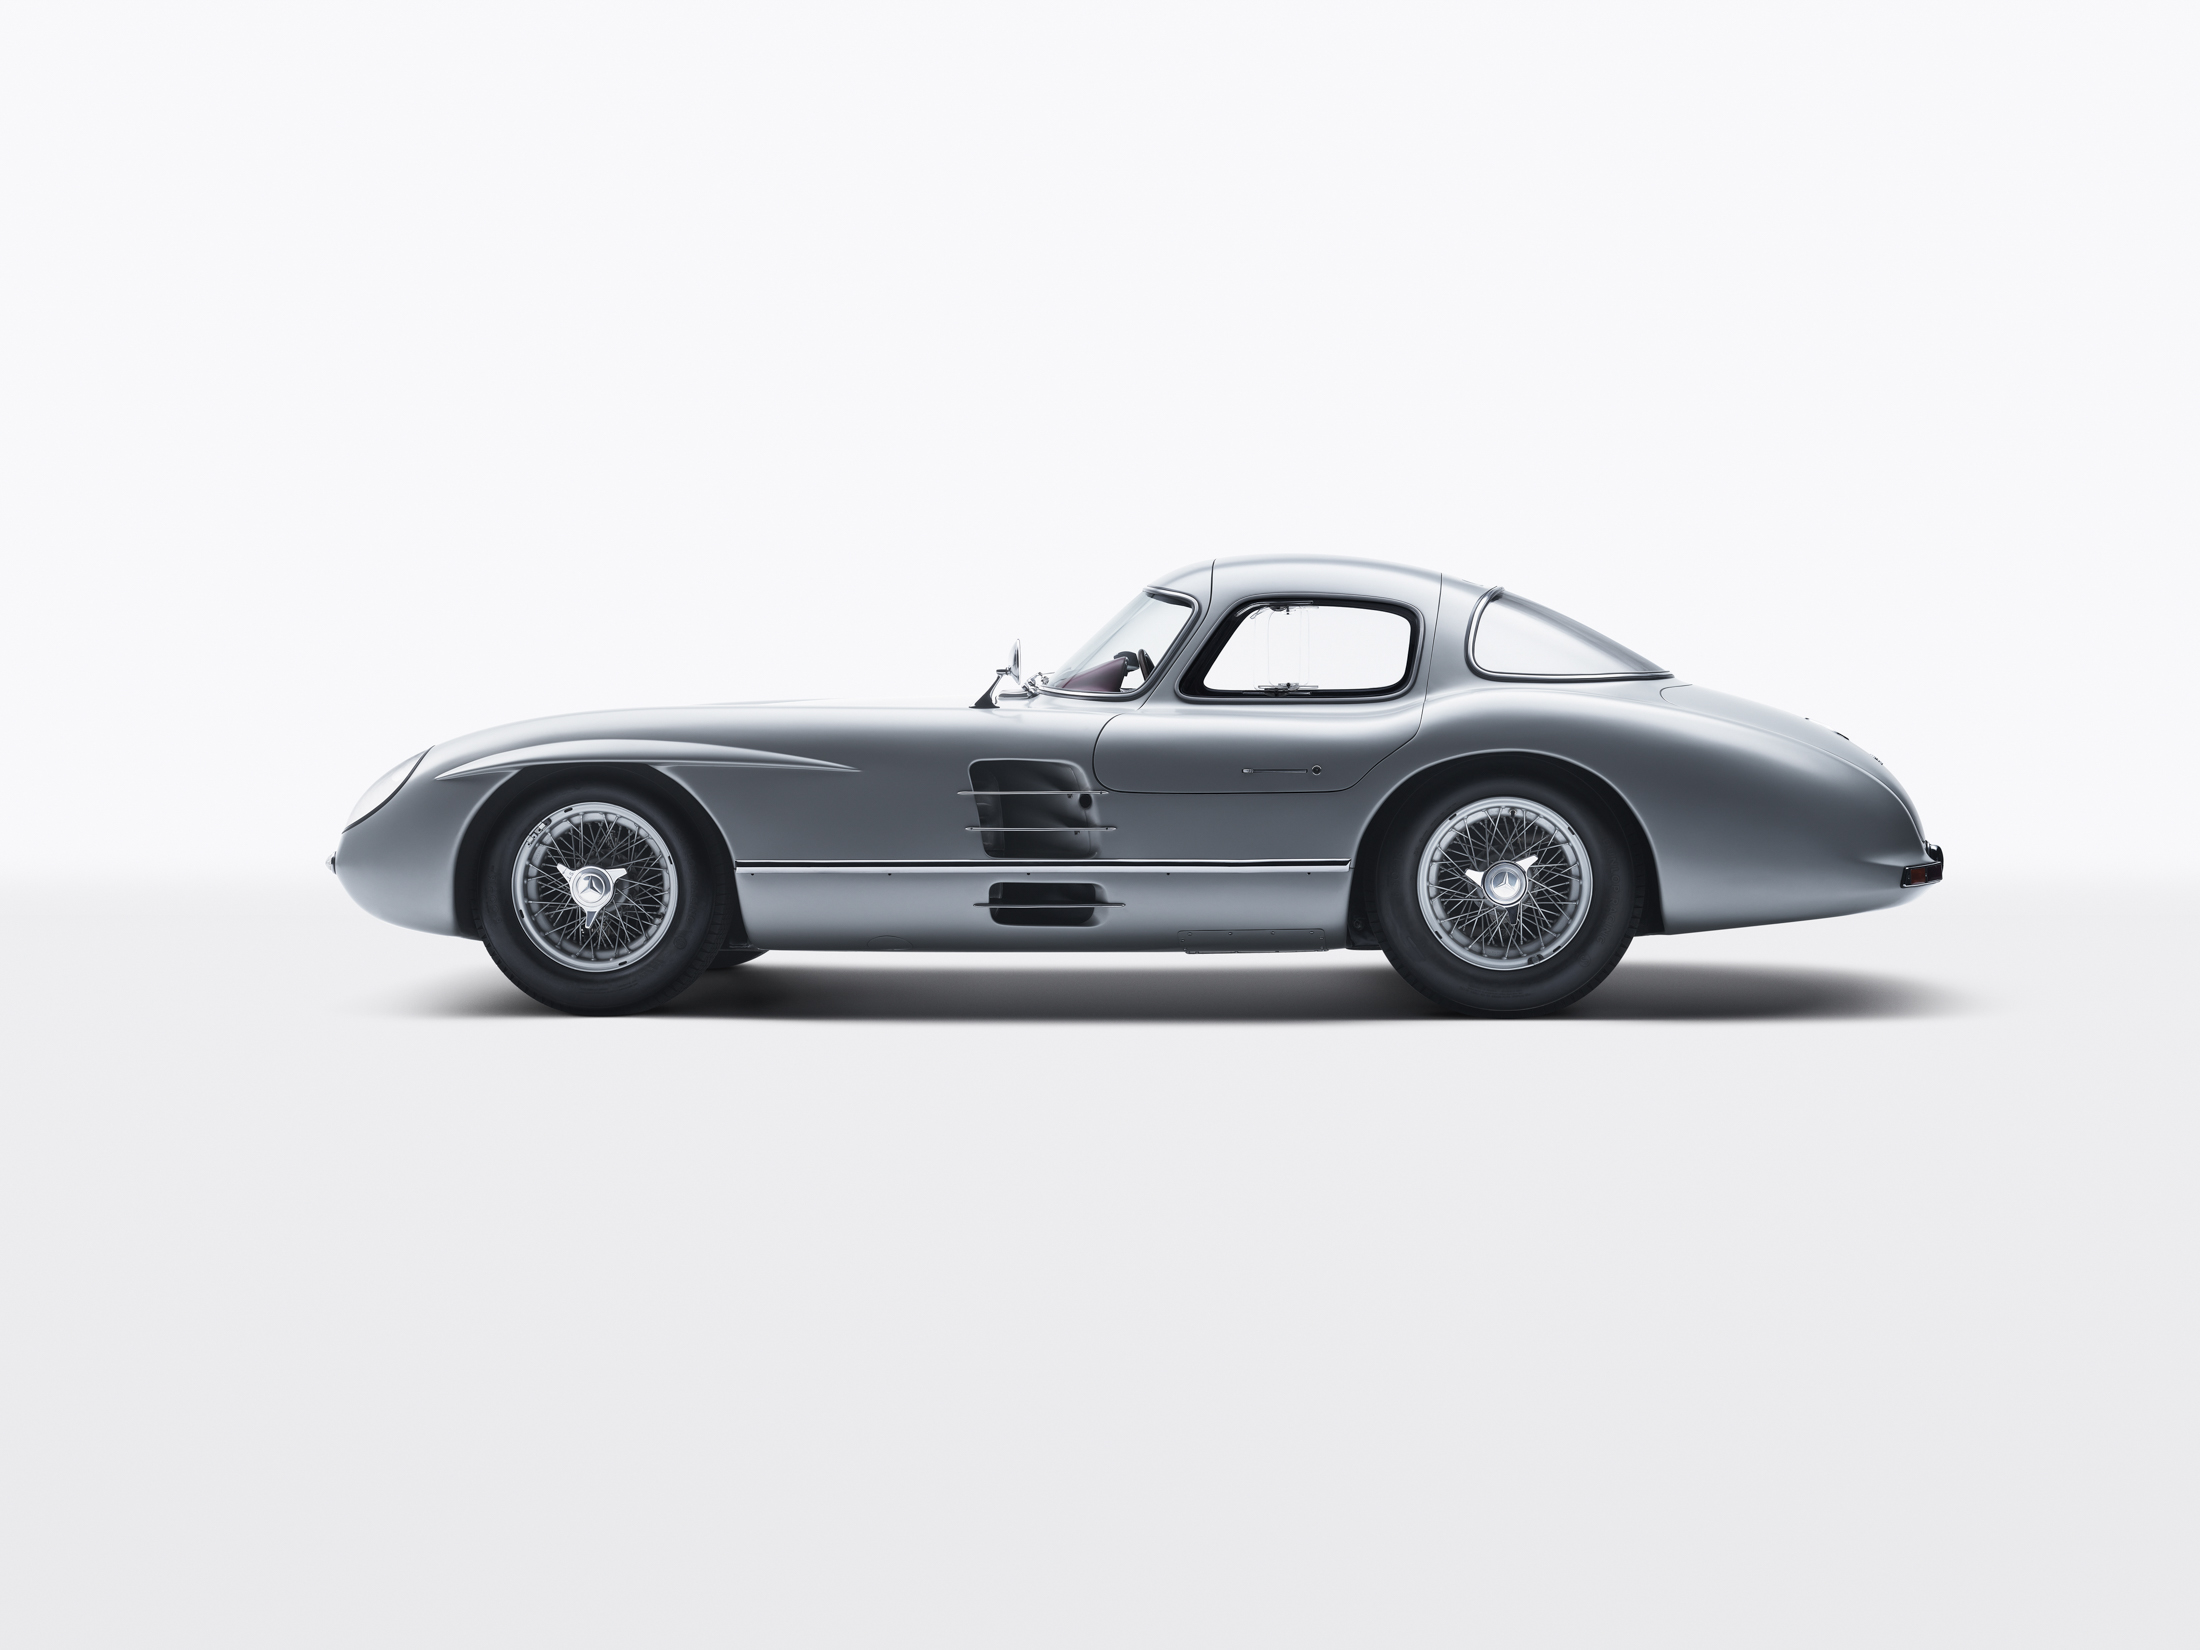 The Most Expensive Car in the World 1955 Mercedes-Benz 300 SLR Uhlenhaut Coupe photo photo